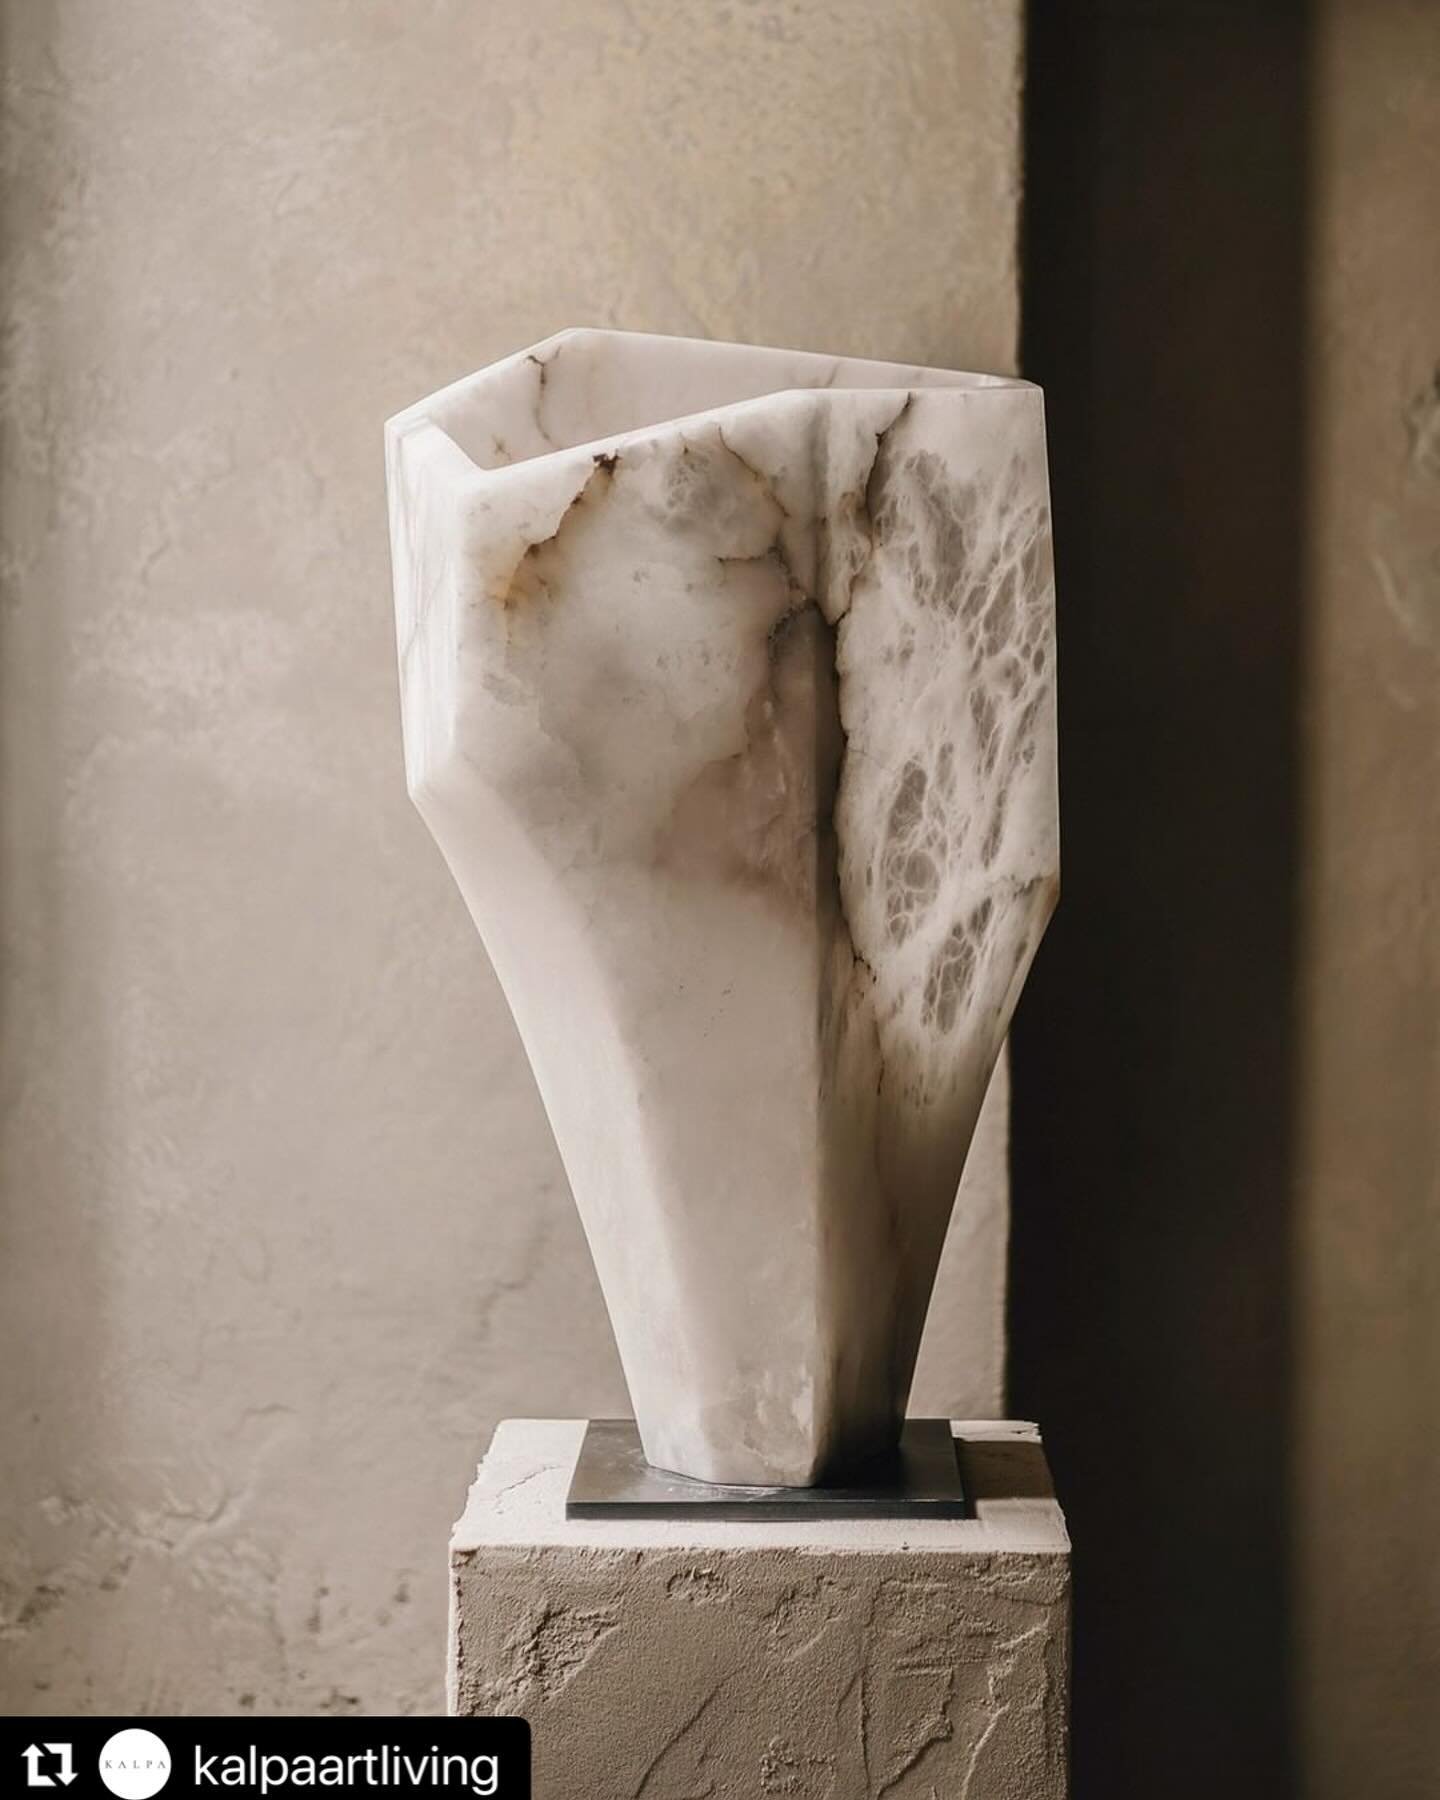 Some atmospheric images of my Vault Vessels in @kalpaartliving gallery in Volterra - one of the ancient capitals work in alabaster back into the deep classical past with the Etruscans. This enigmatic translucent stone it&rsquo;s found in the rolling 